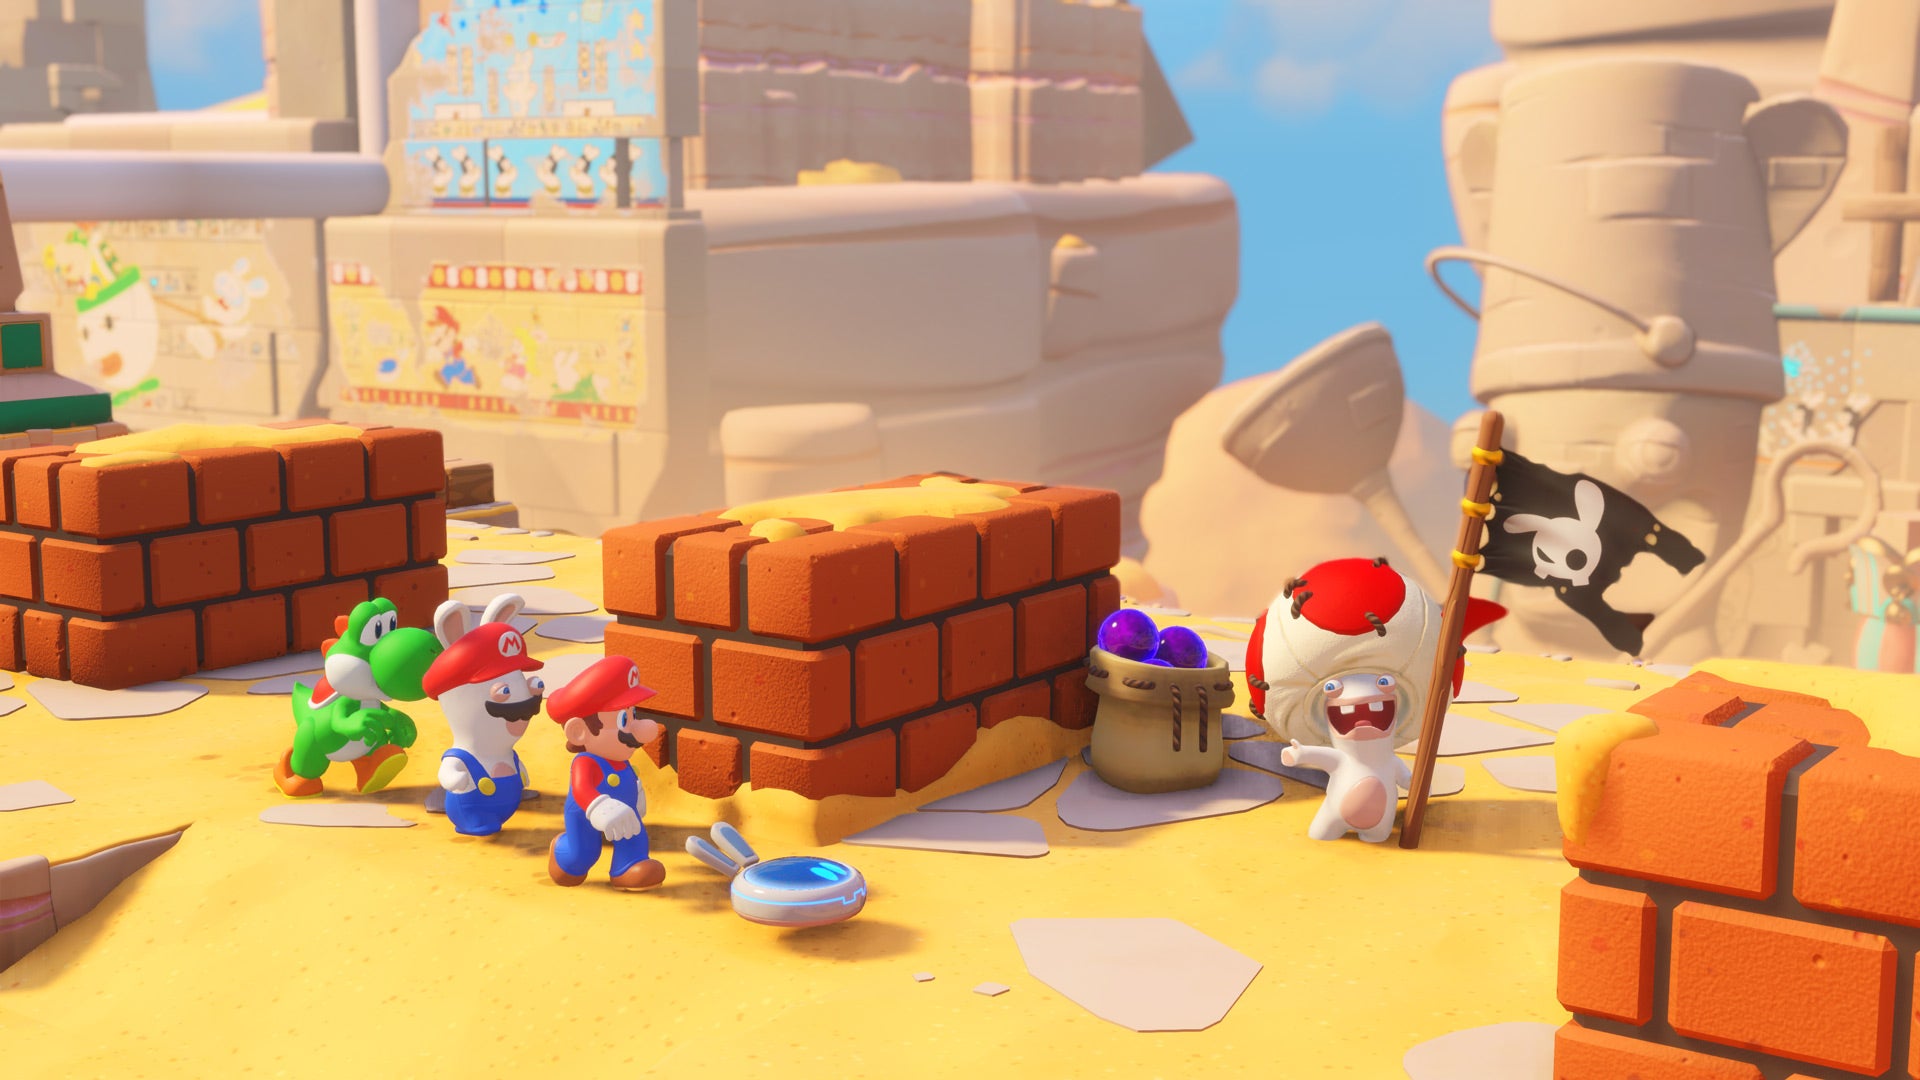 Mario and Rabbids characters in colorful strategy game scene.